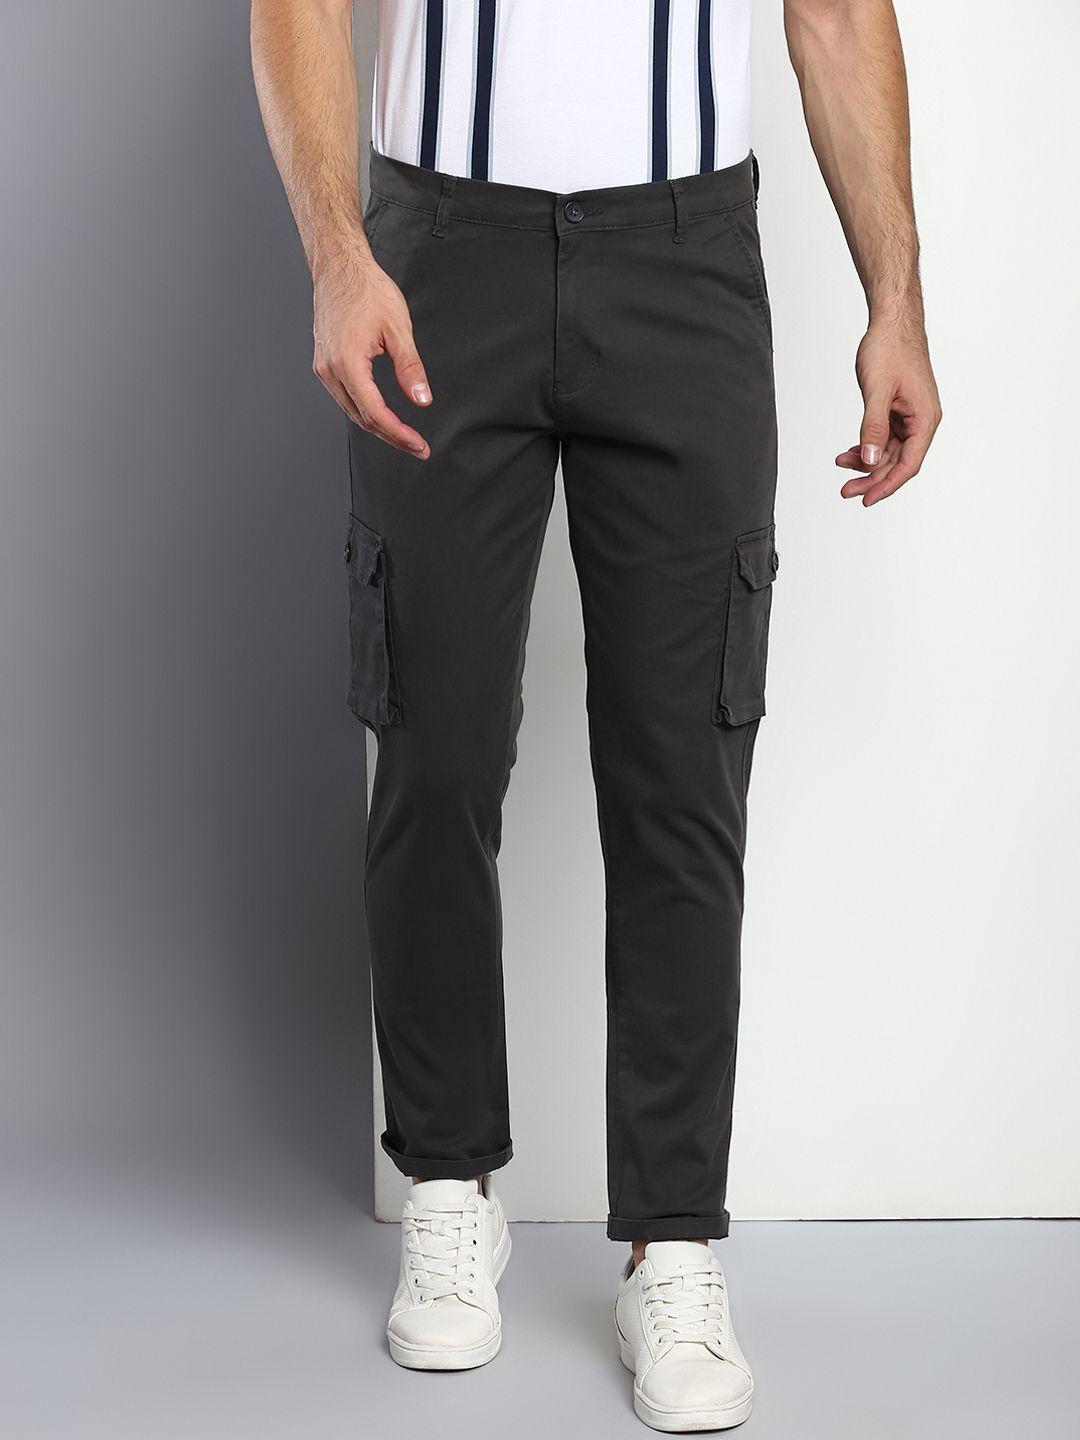 dennis lingo men grey tapered fit cargos trousers